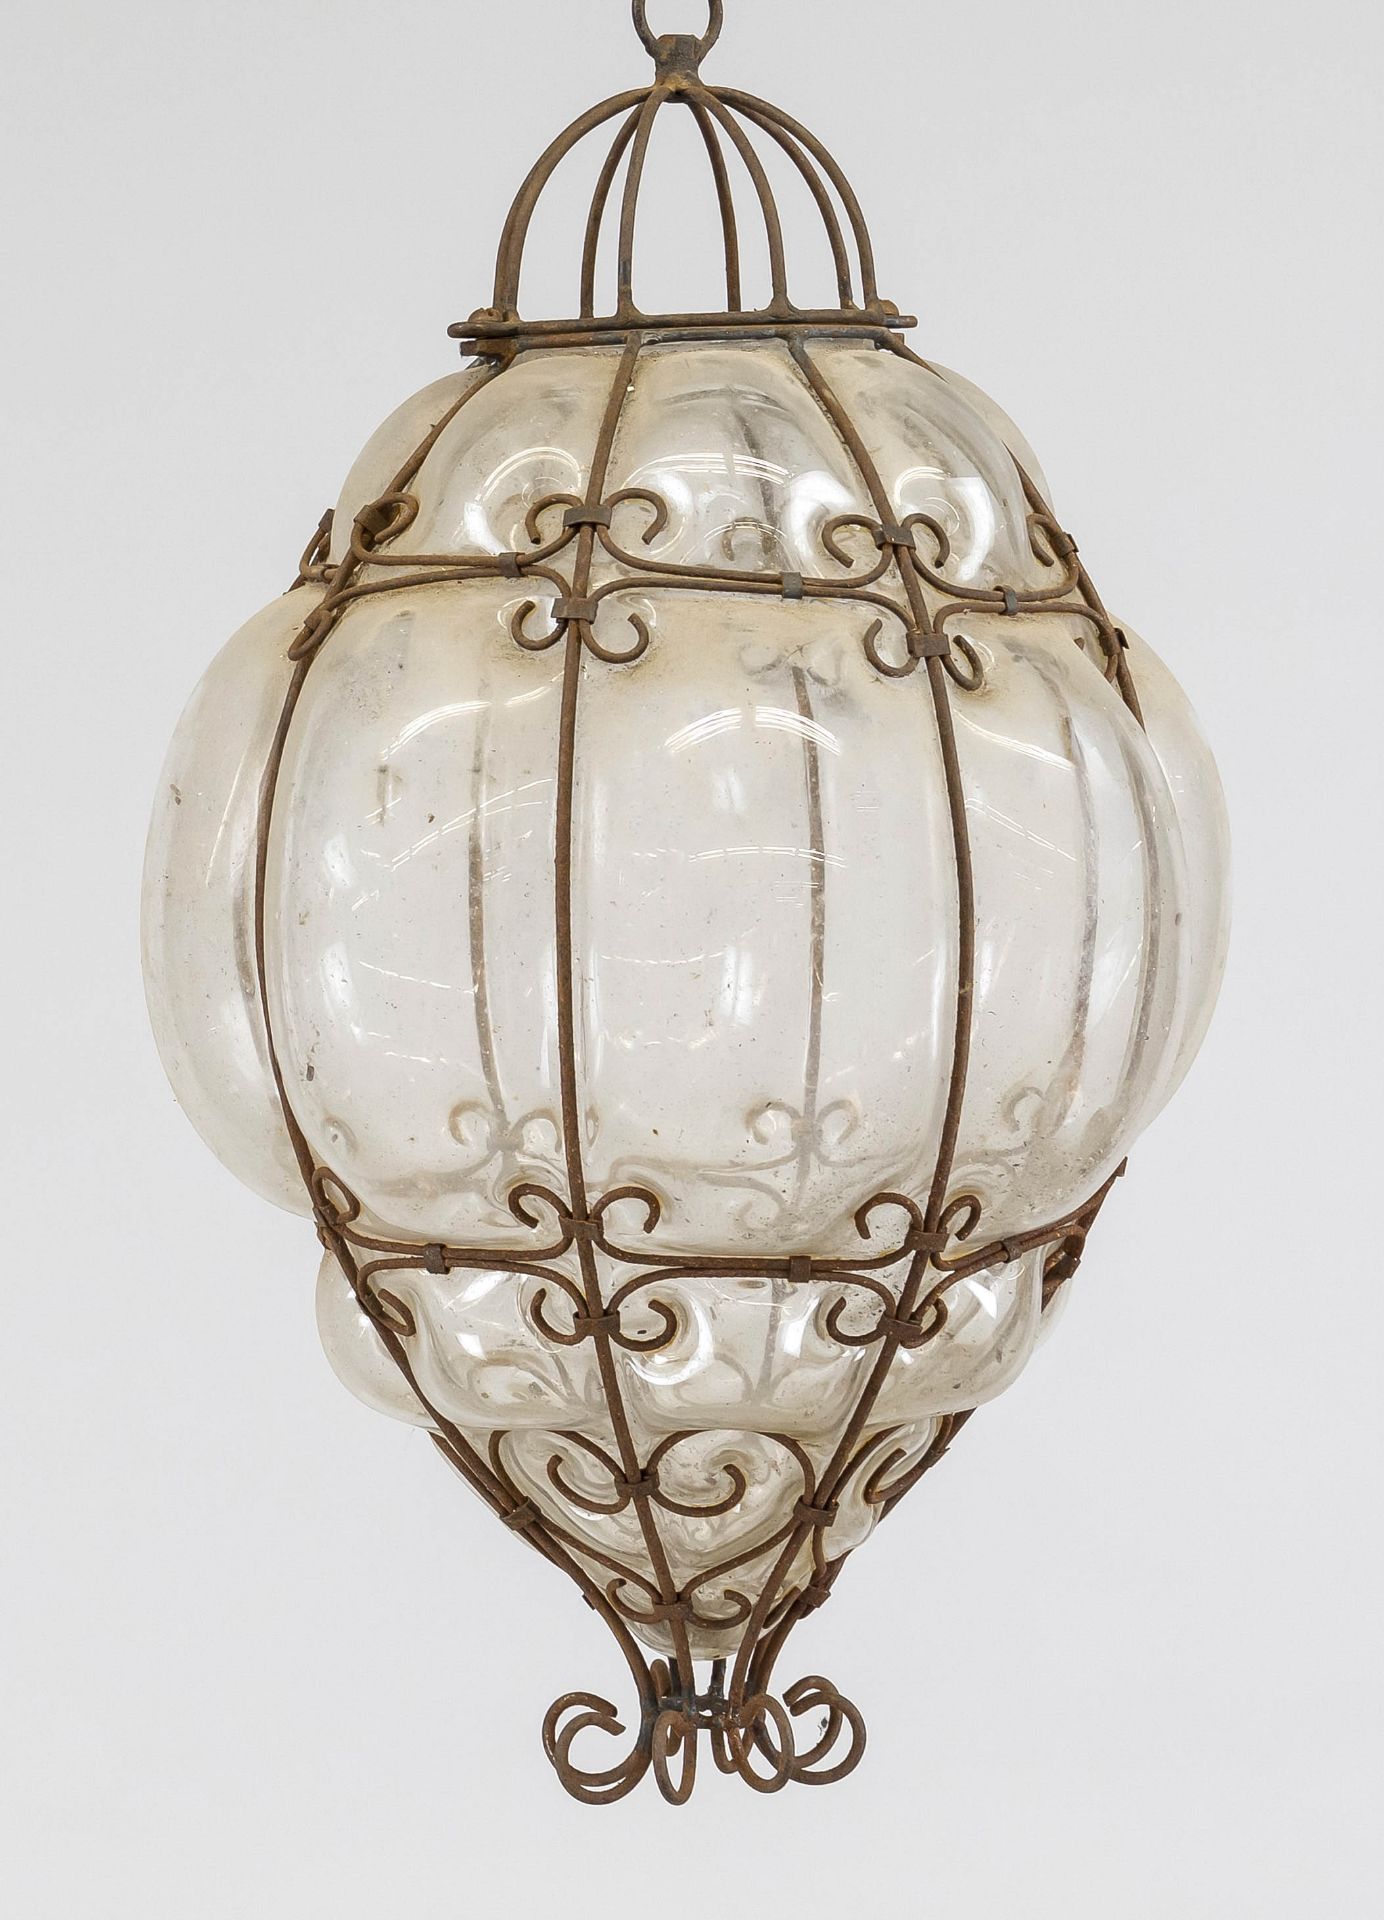 Murano ceiling lantern, probably 19th century, transparent glass shade blown into the iron frame,